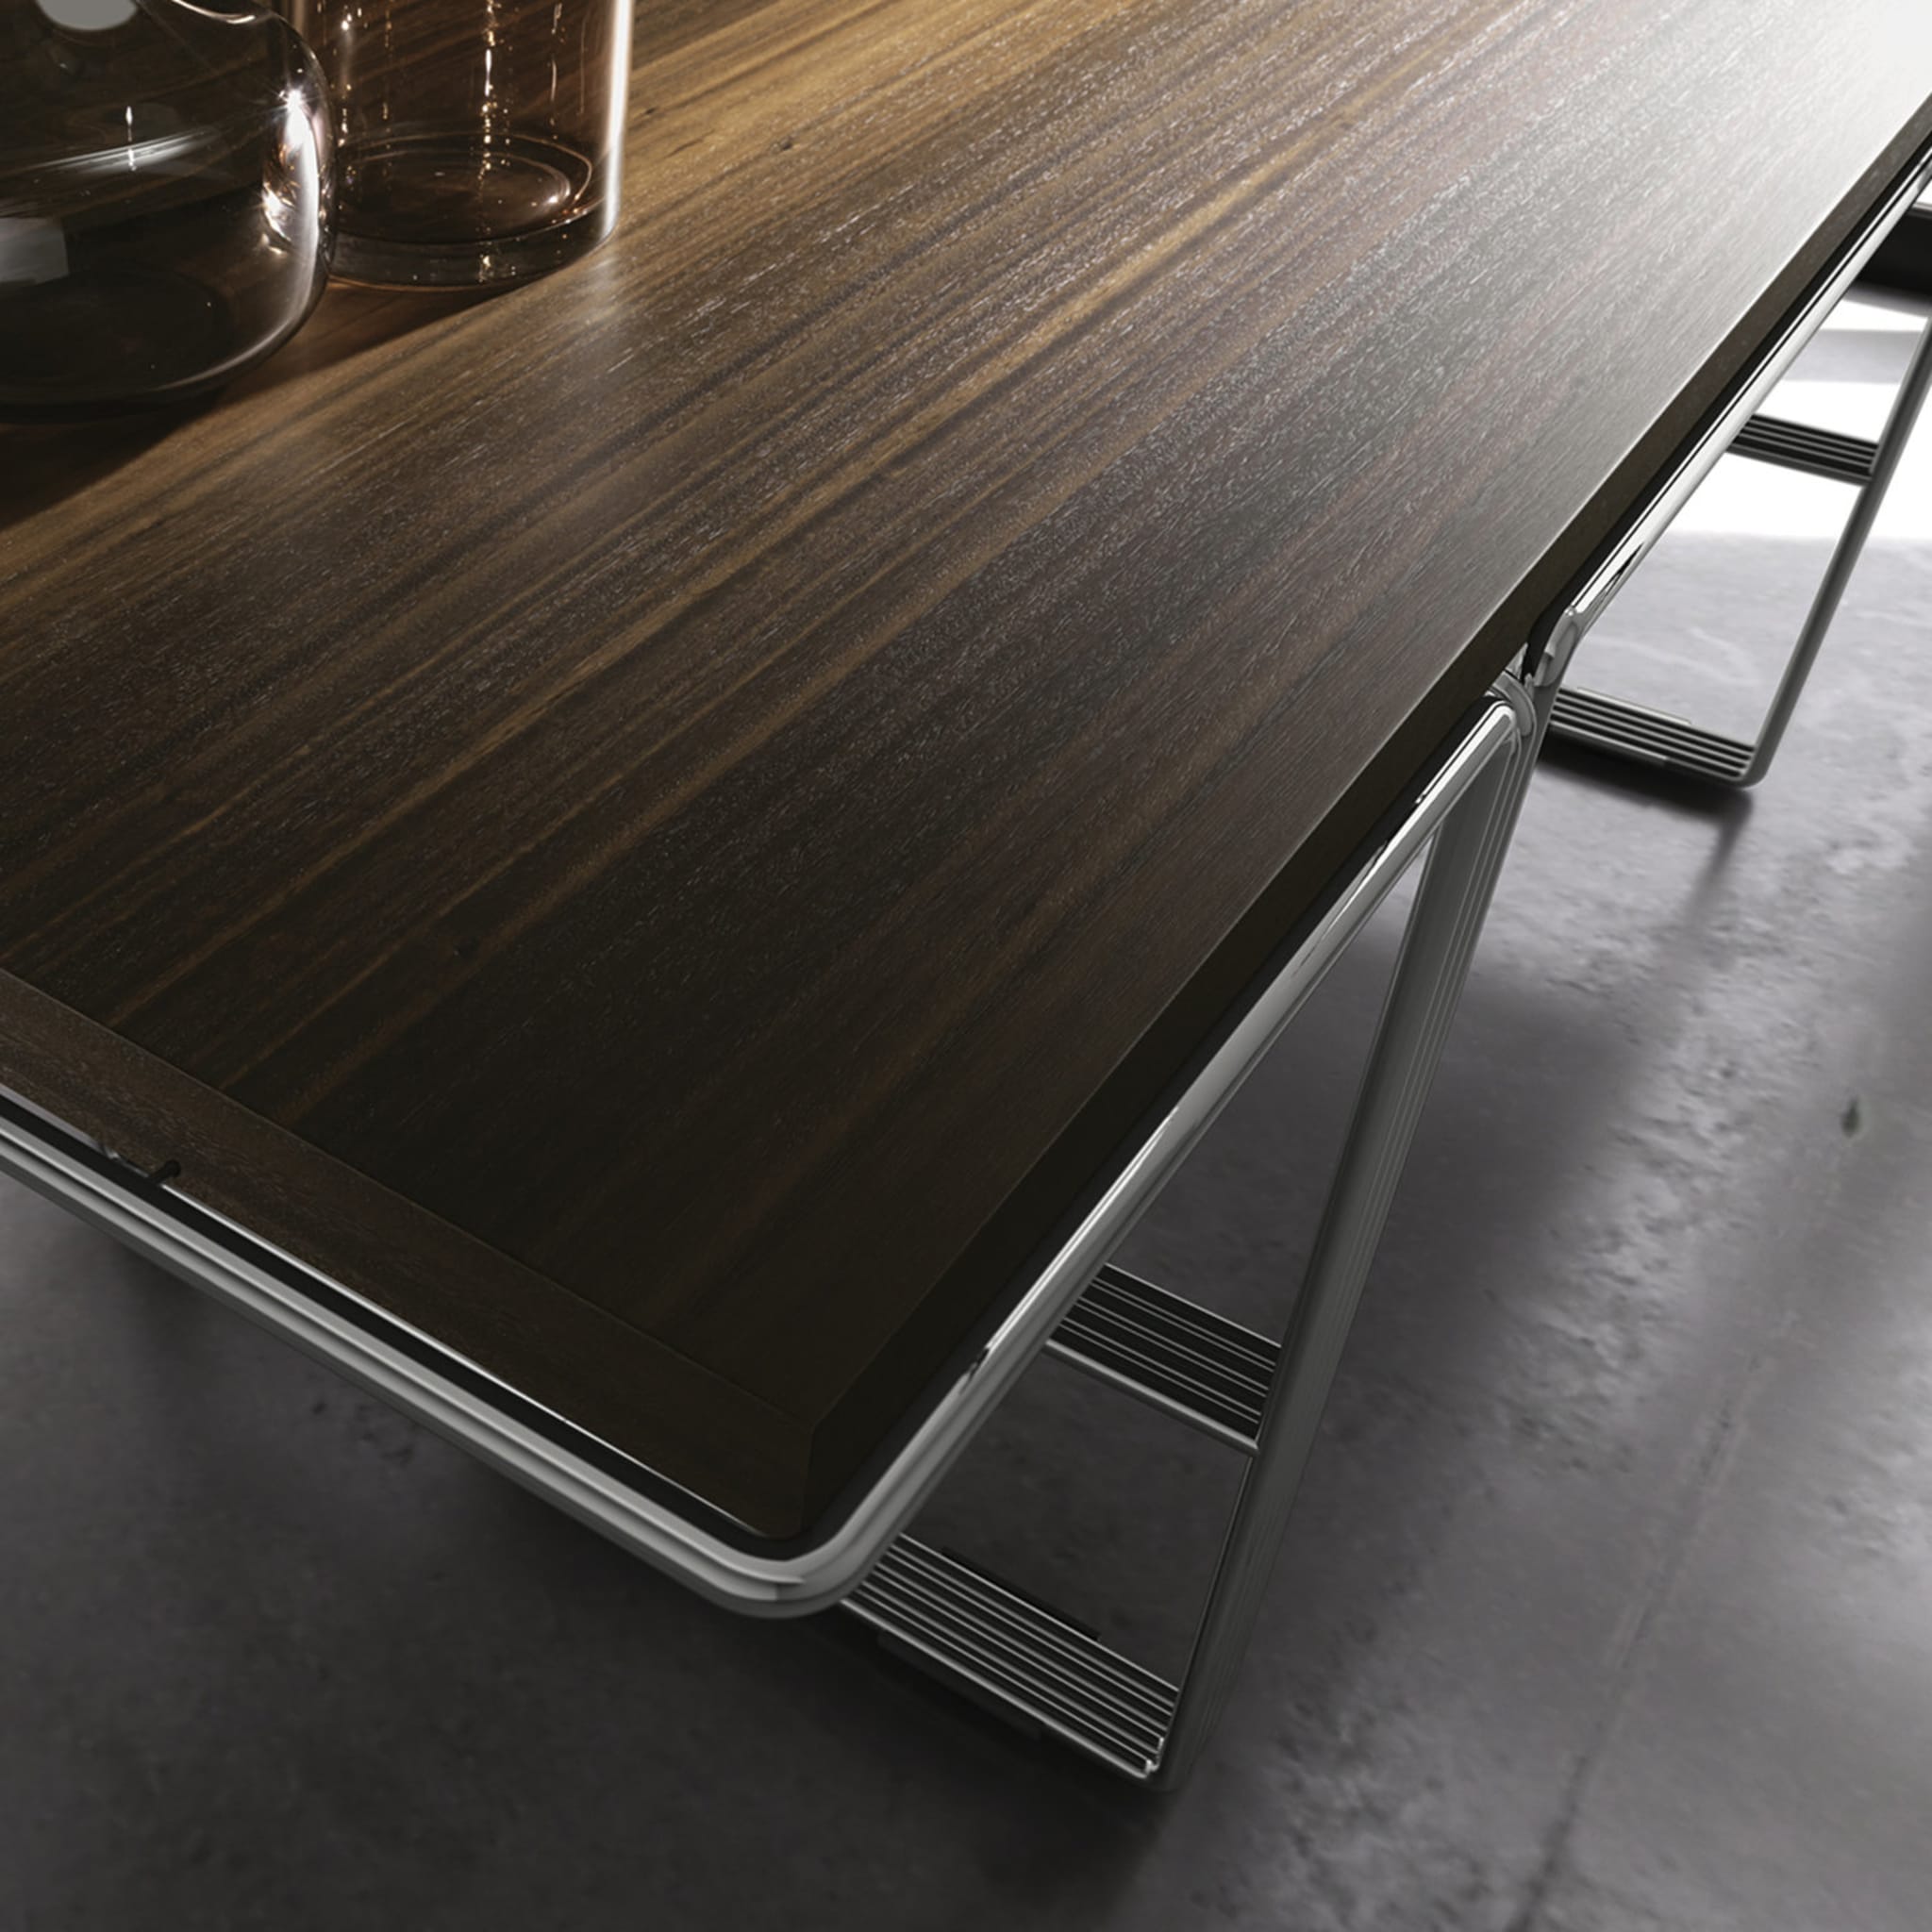 Orelia Wood and Metal Dining Table  - Alternative view 1